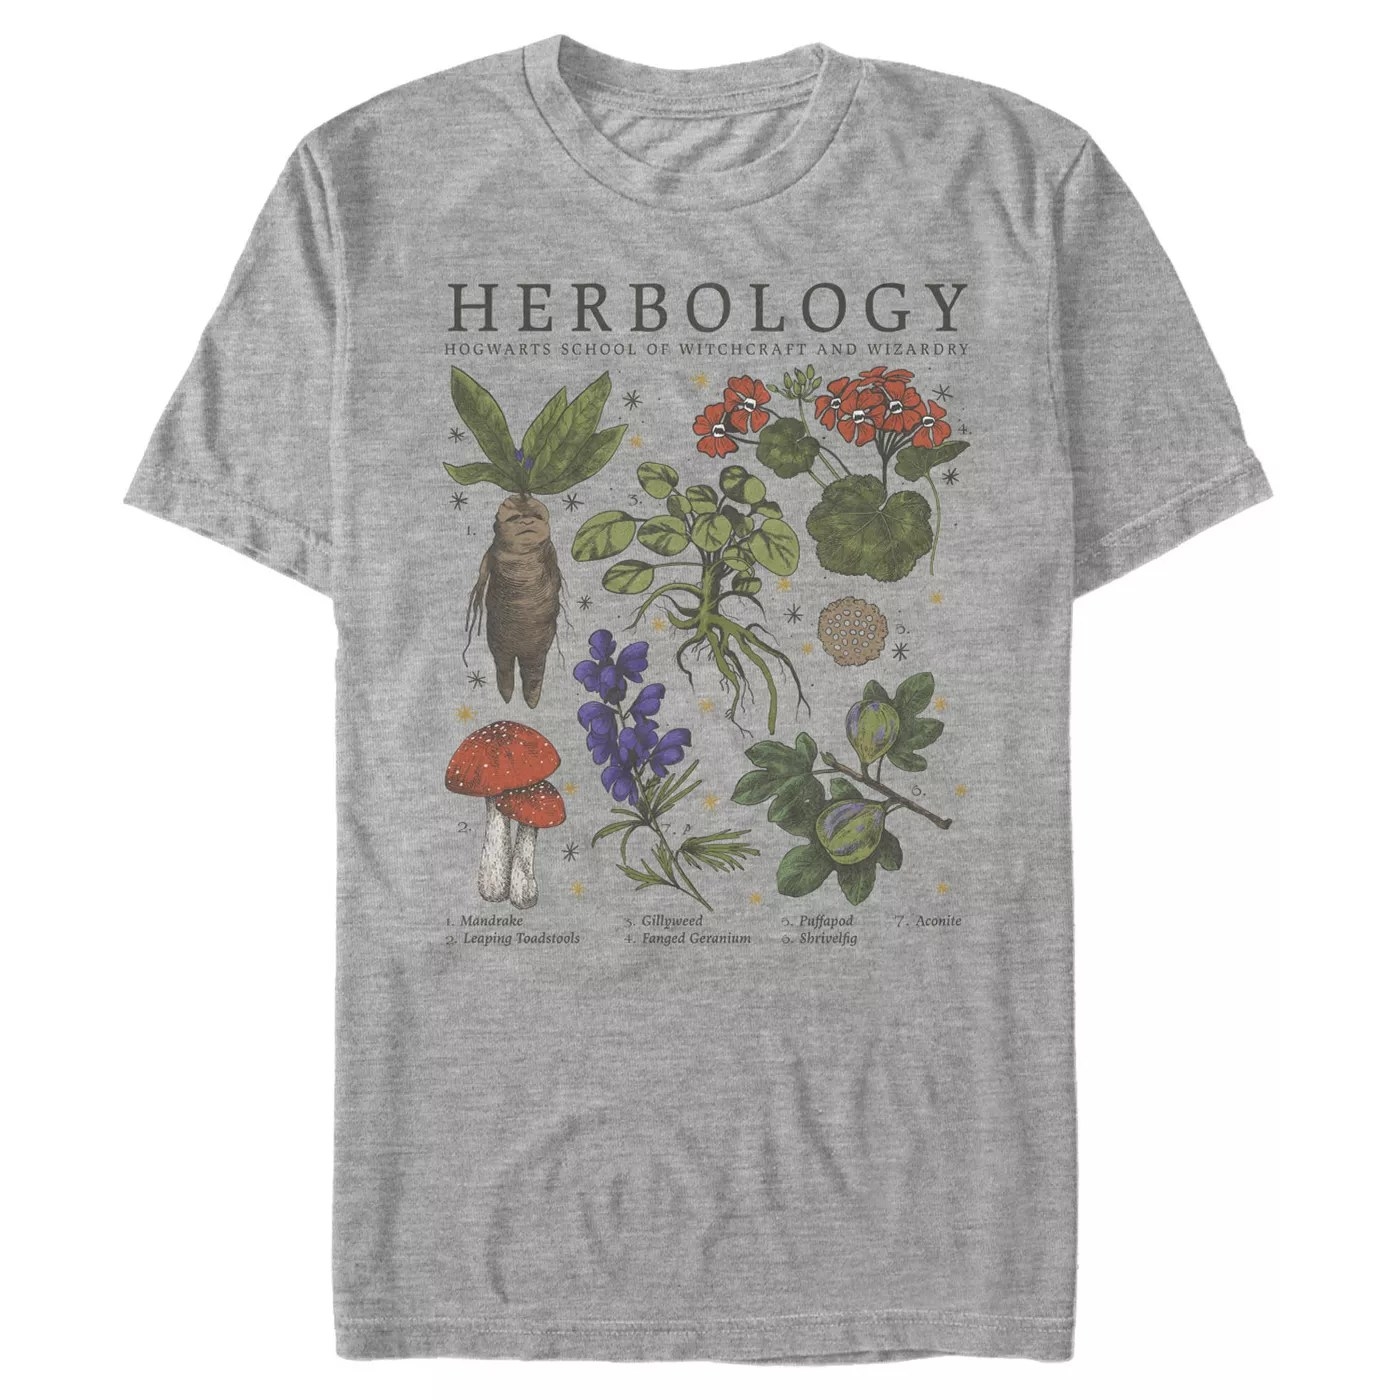 The Herbology shirt